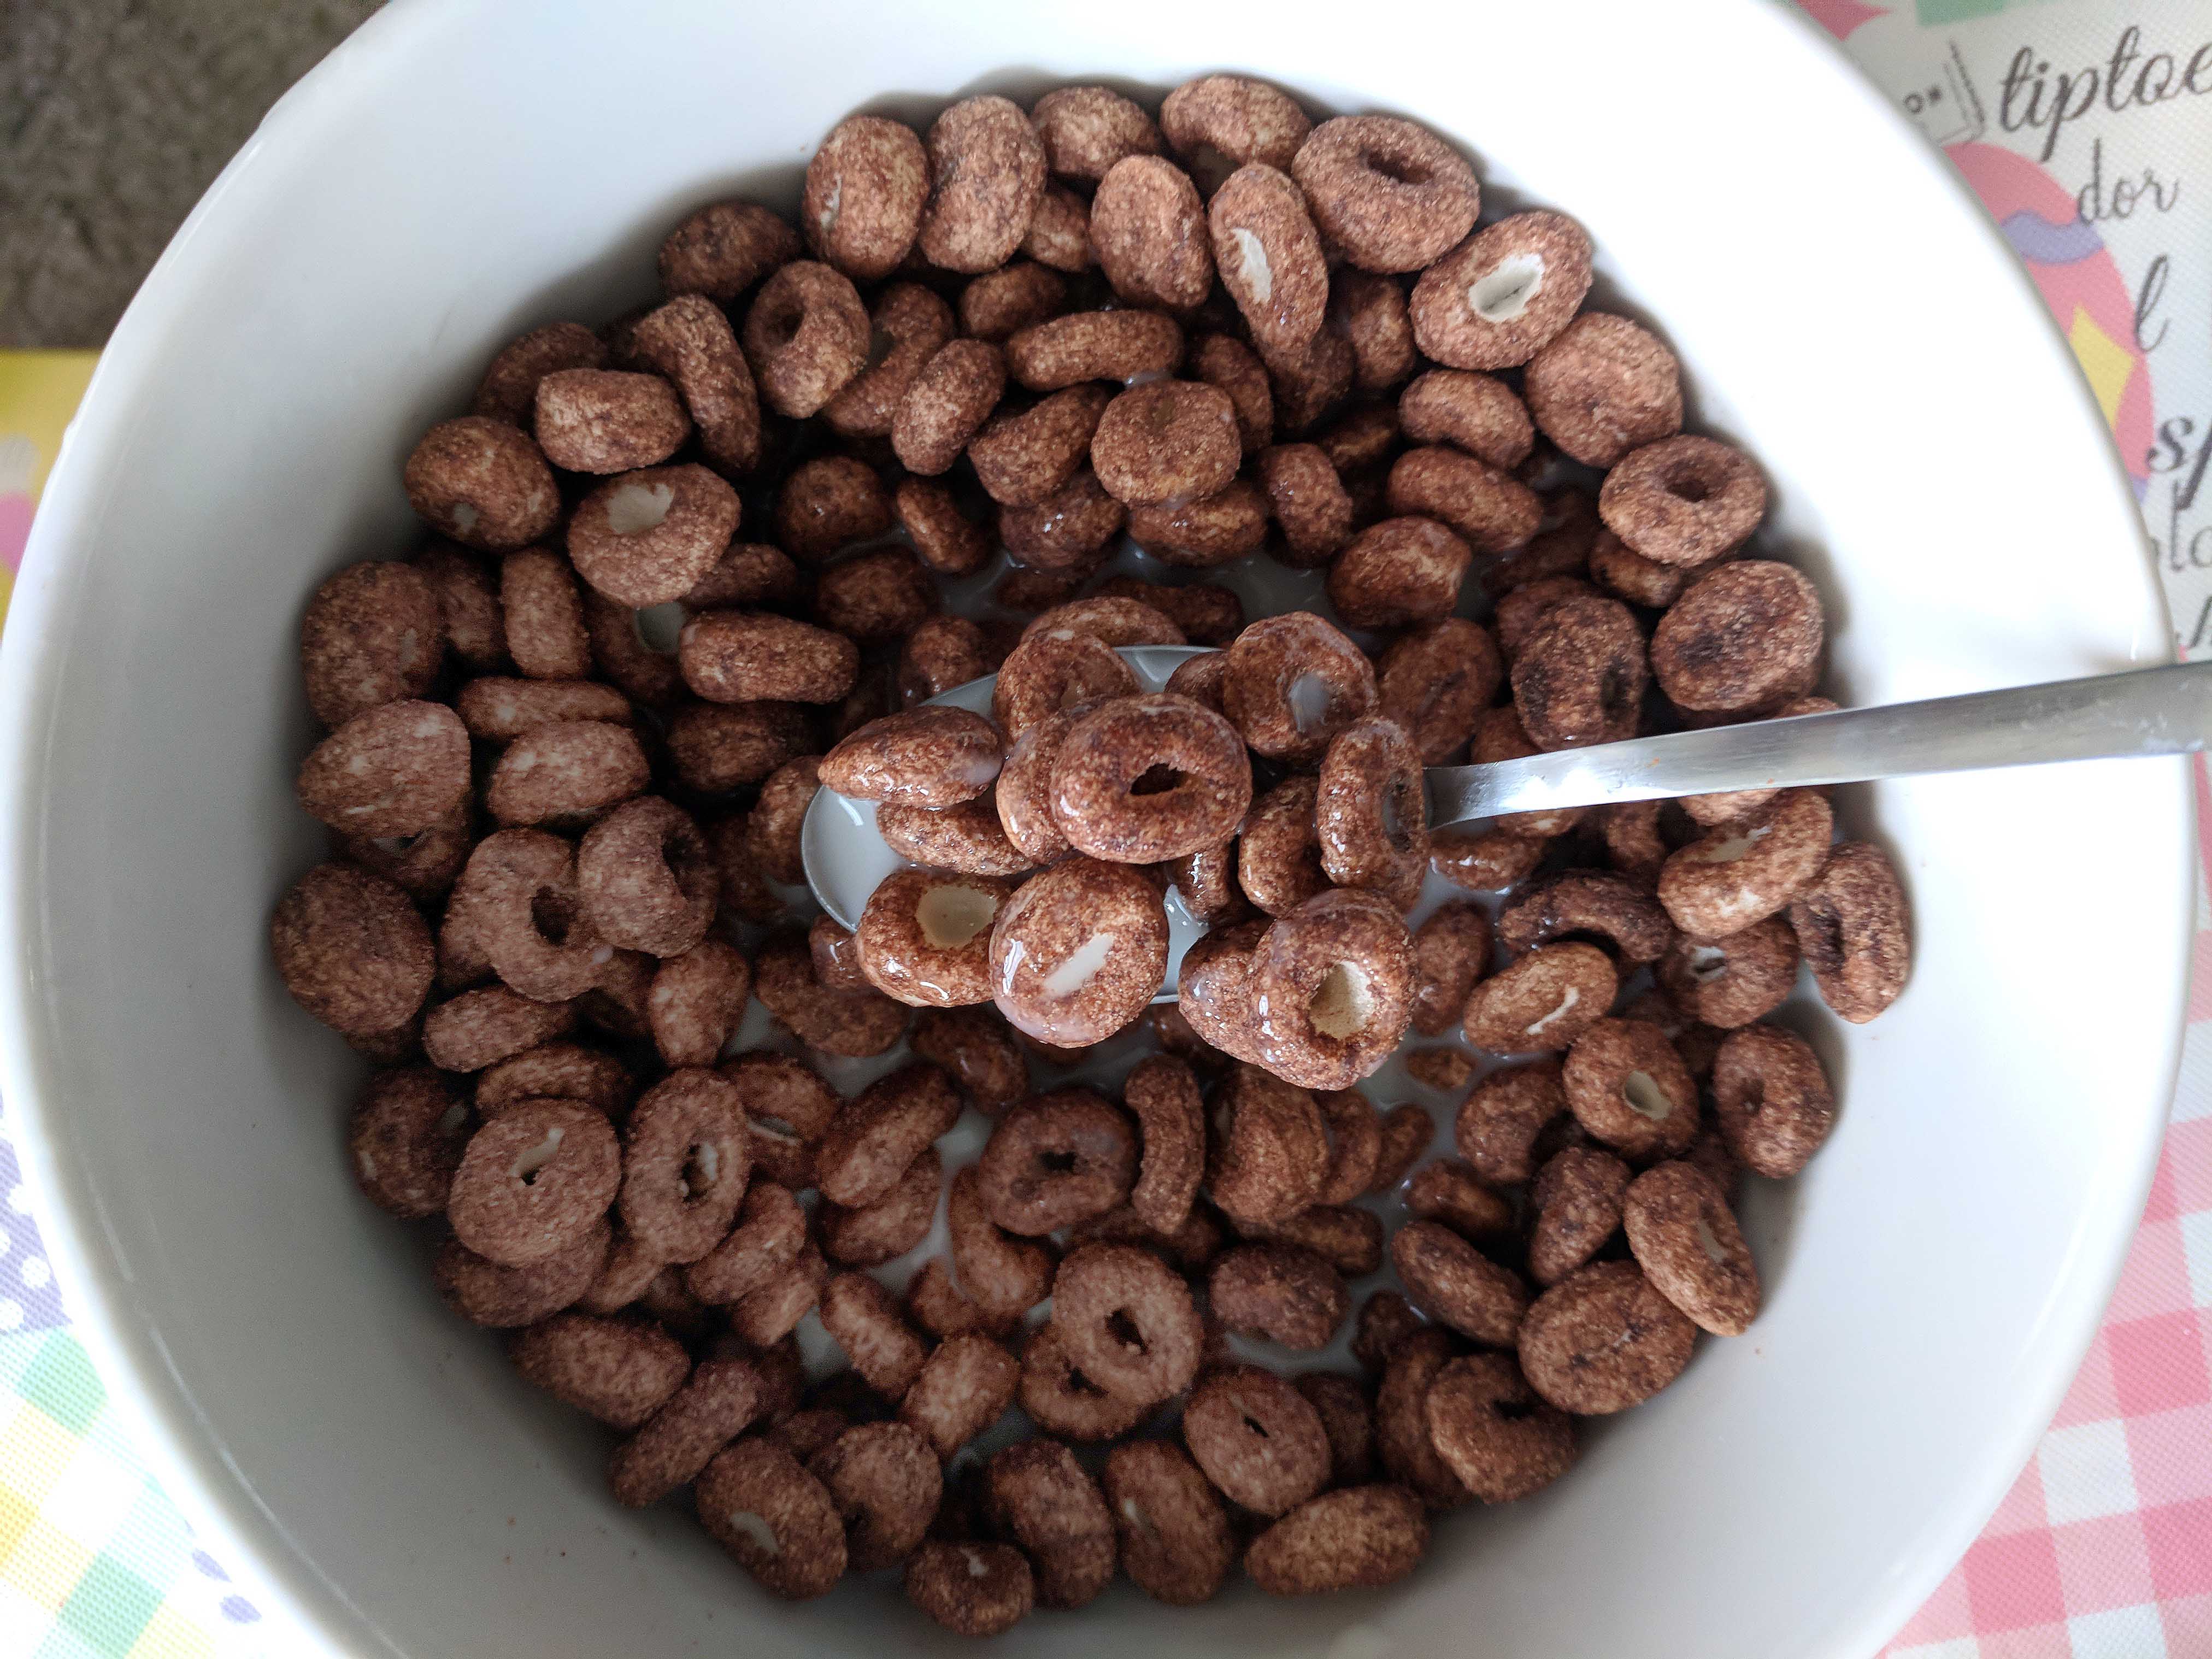 Magic Spoon Cereal Review: A Not-So-Bad Option for Folks With